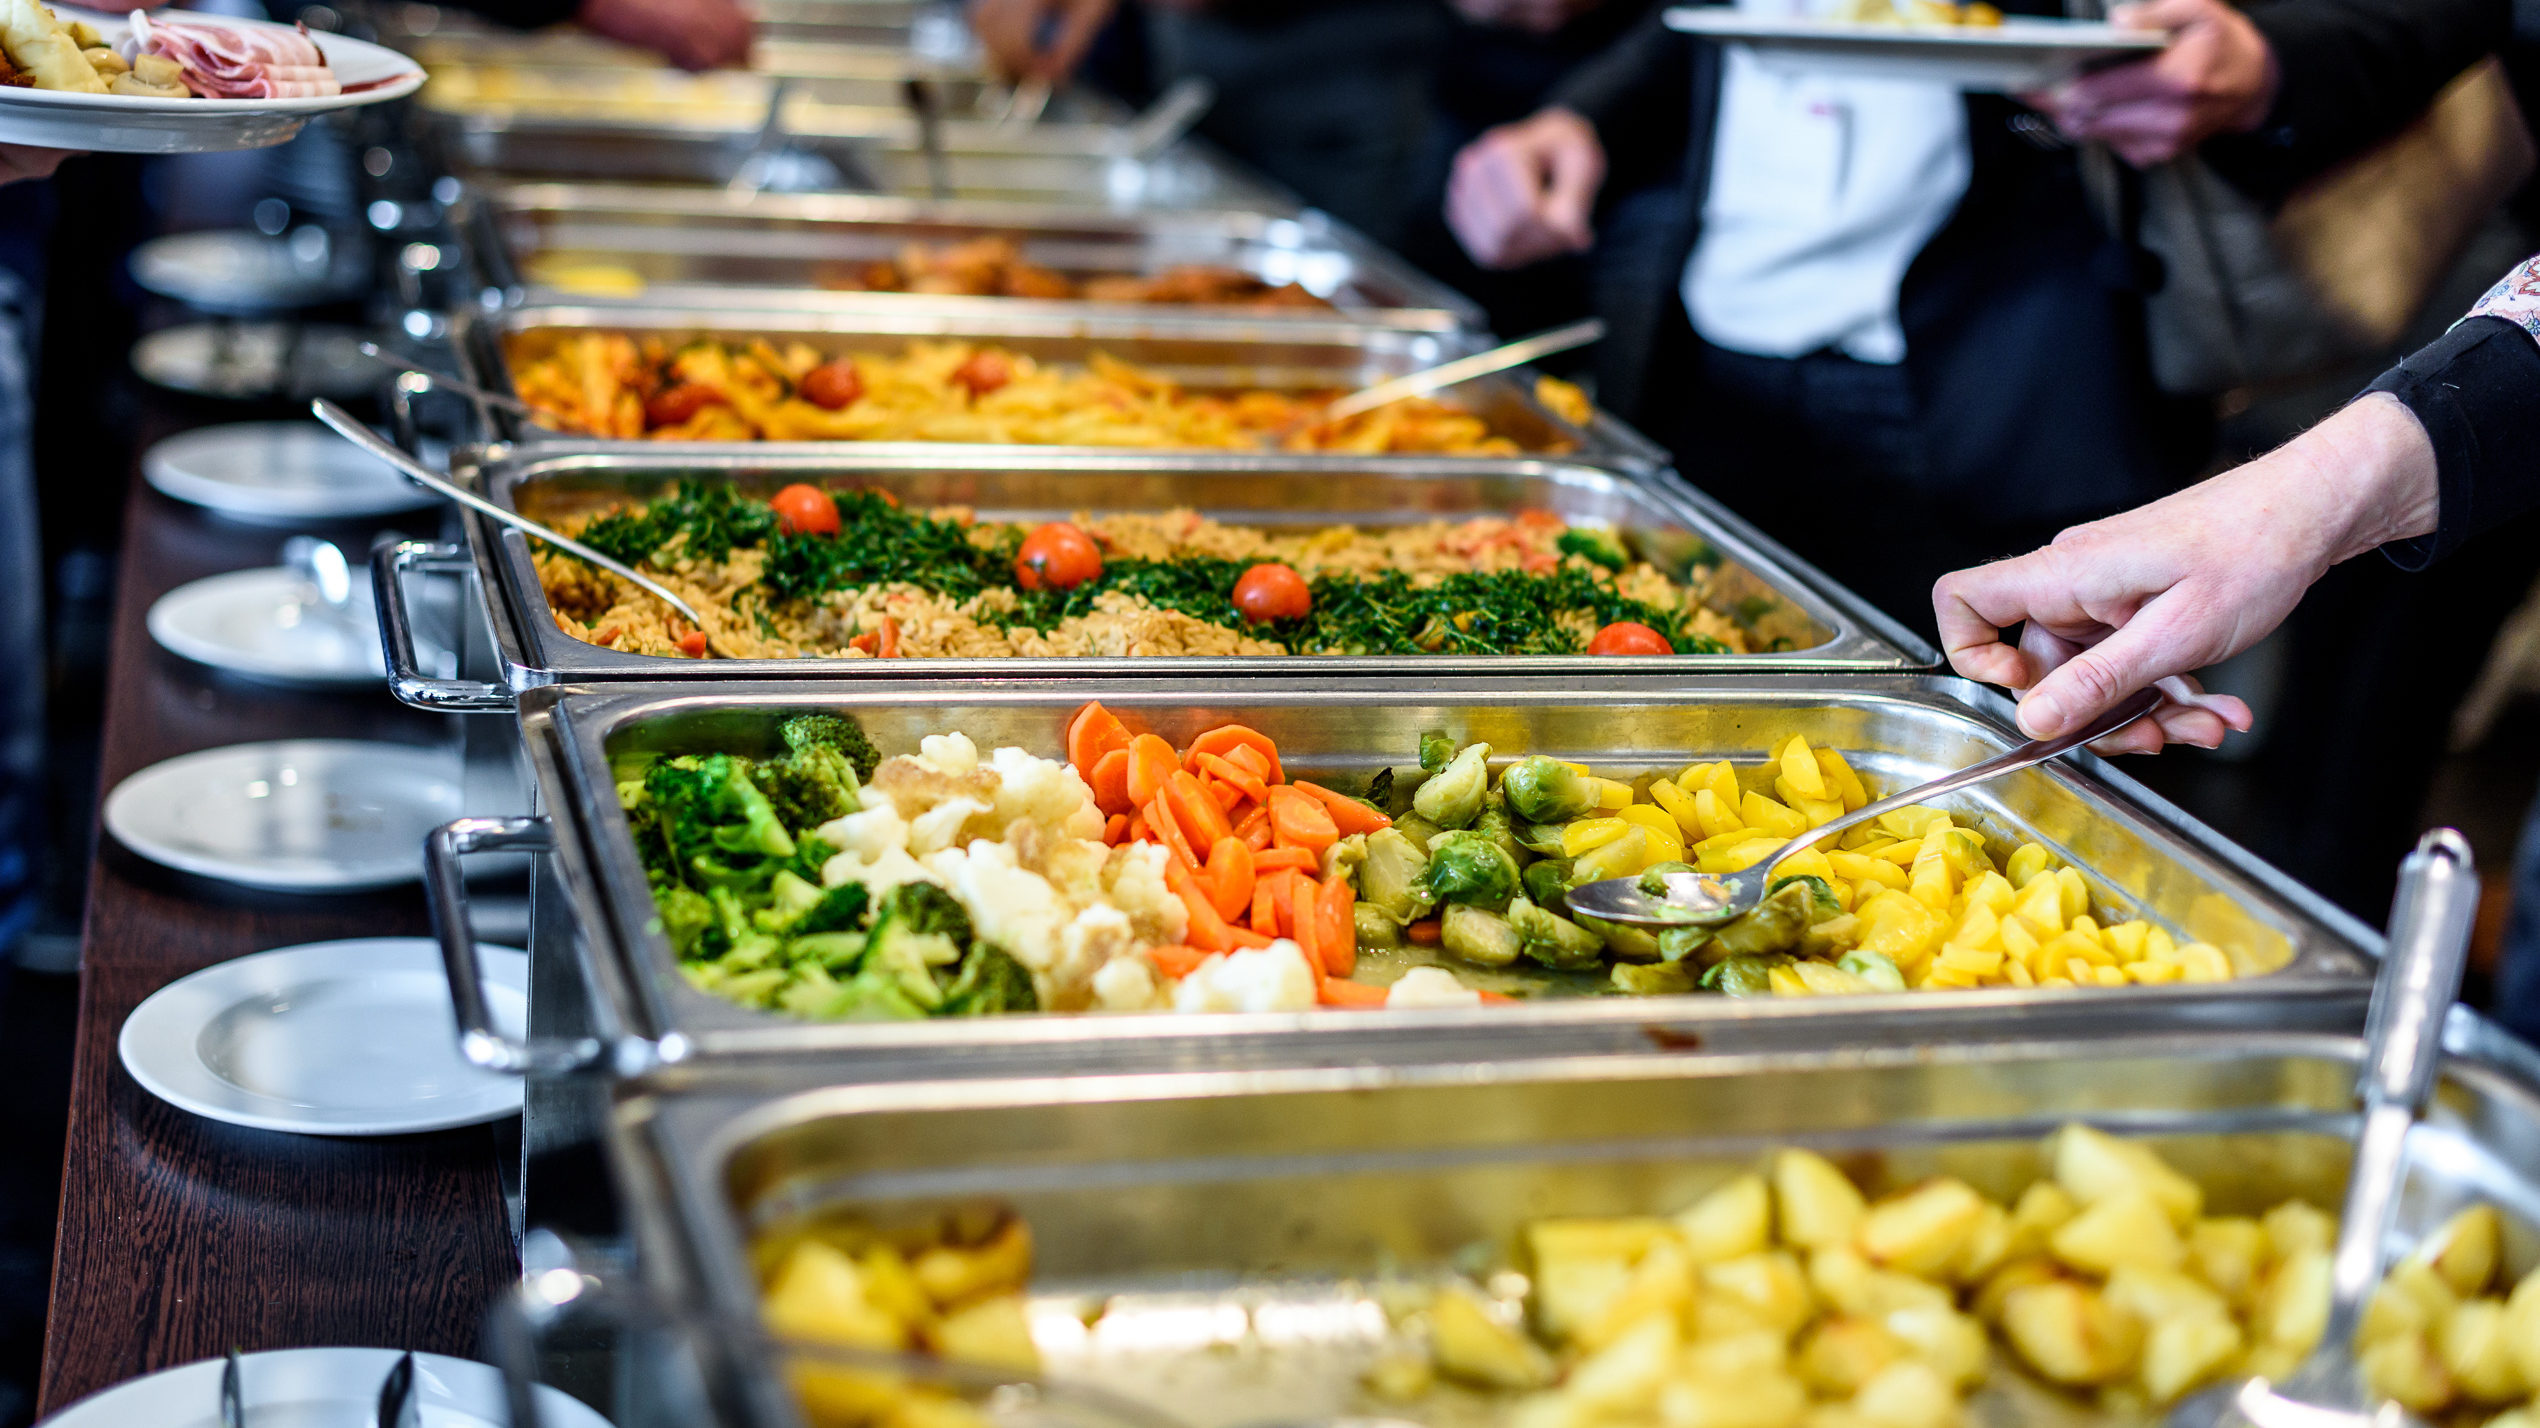 Group of people in catered buffet line